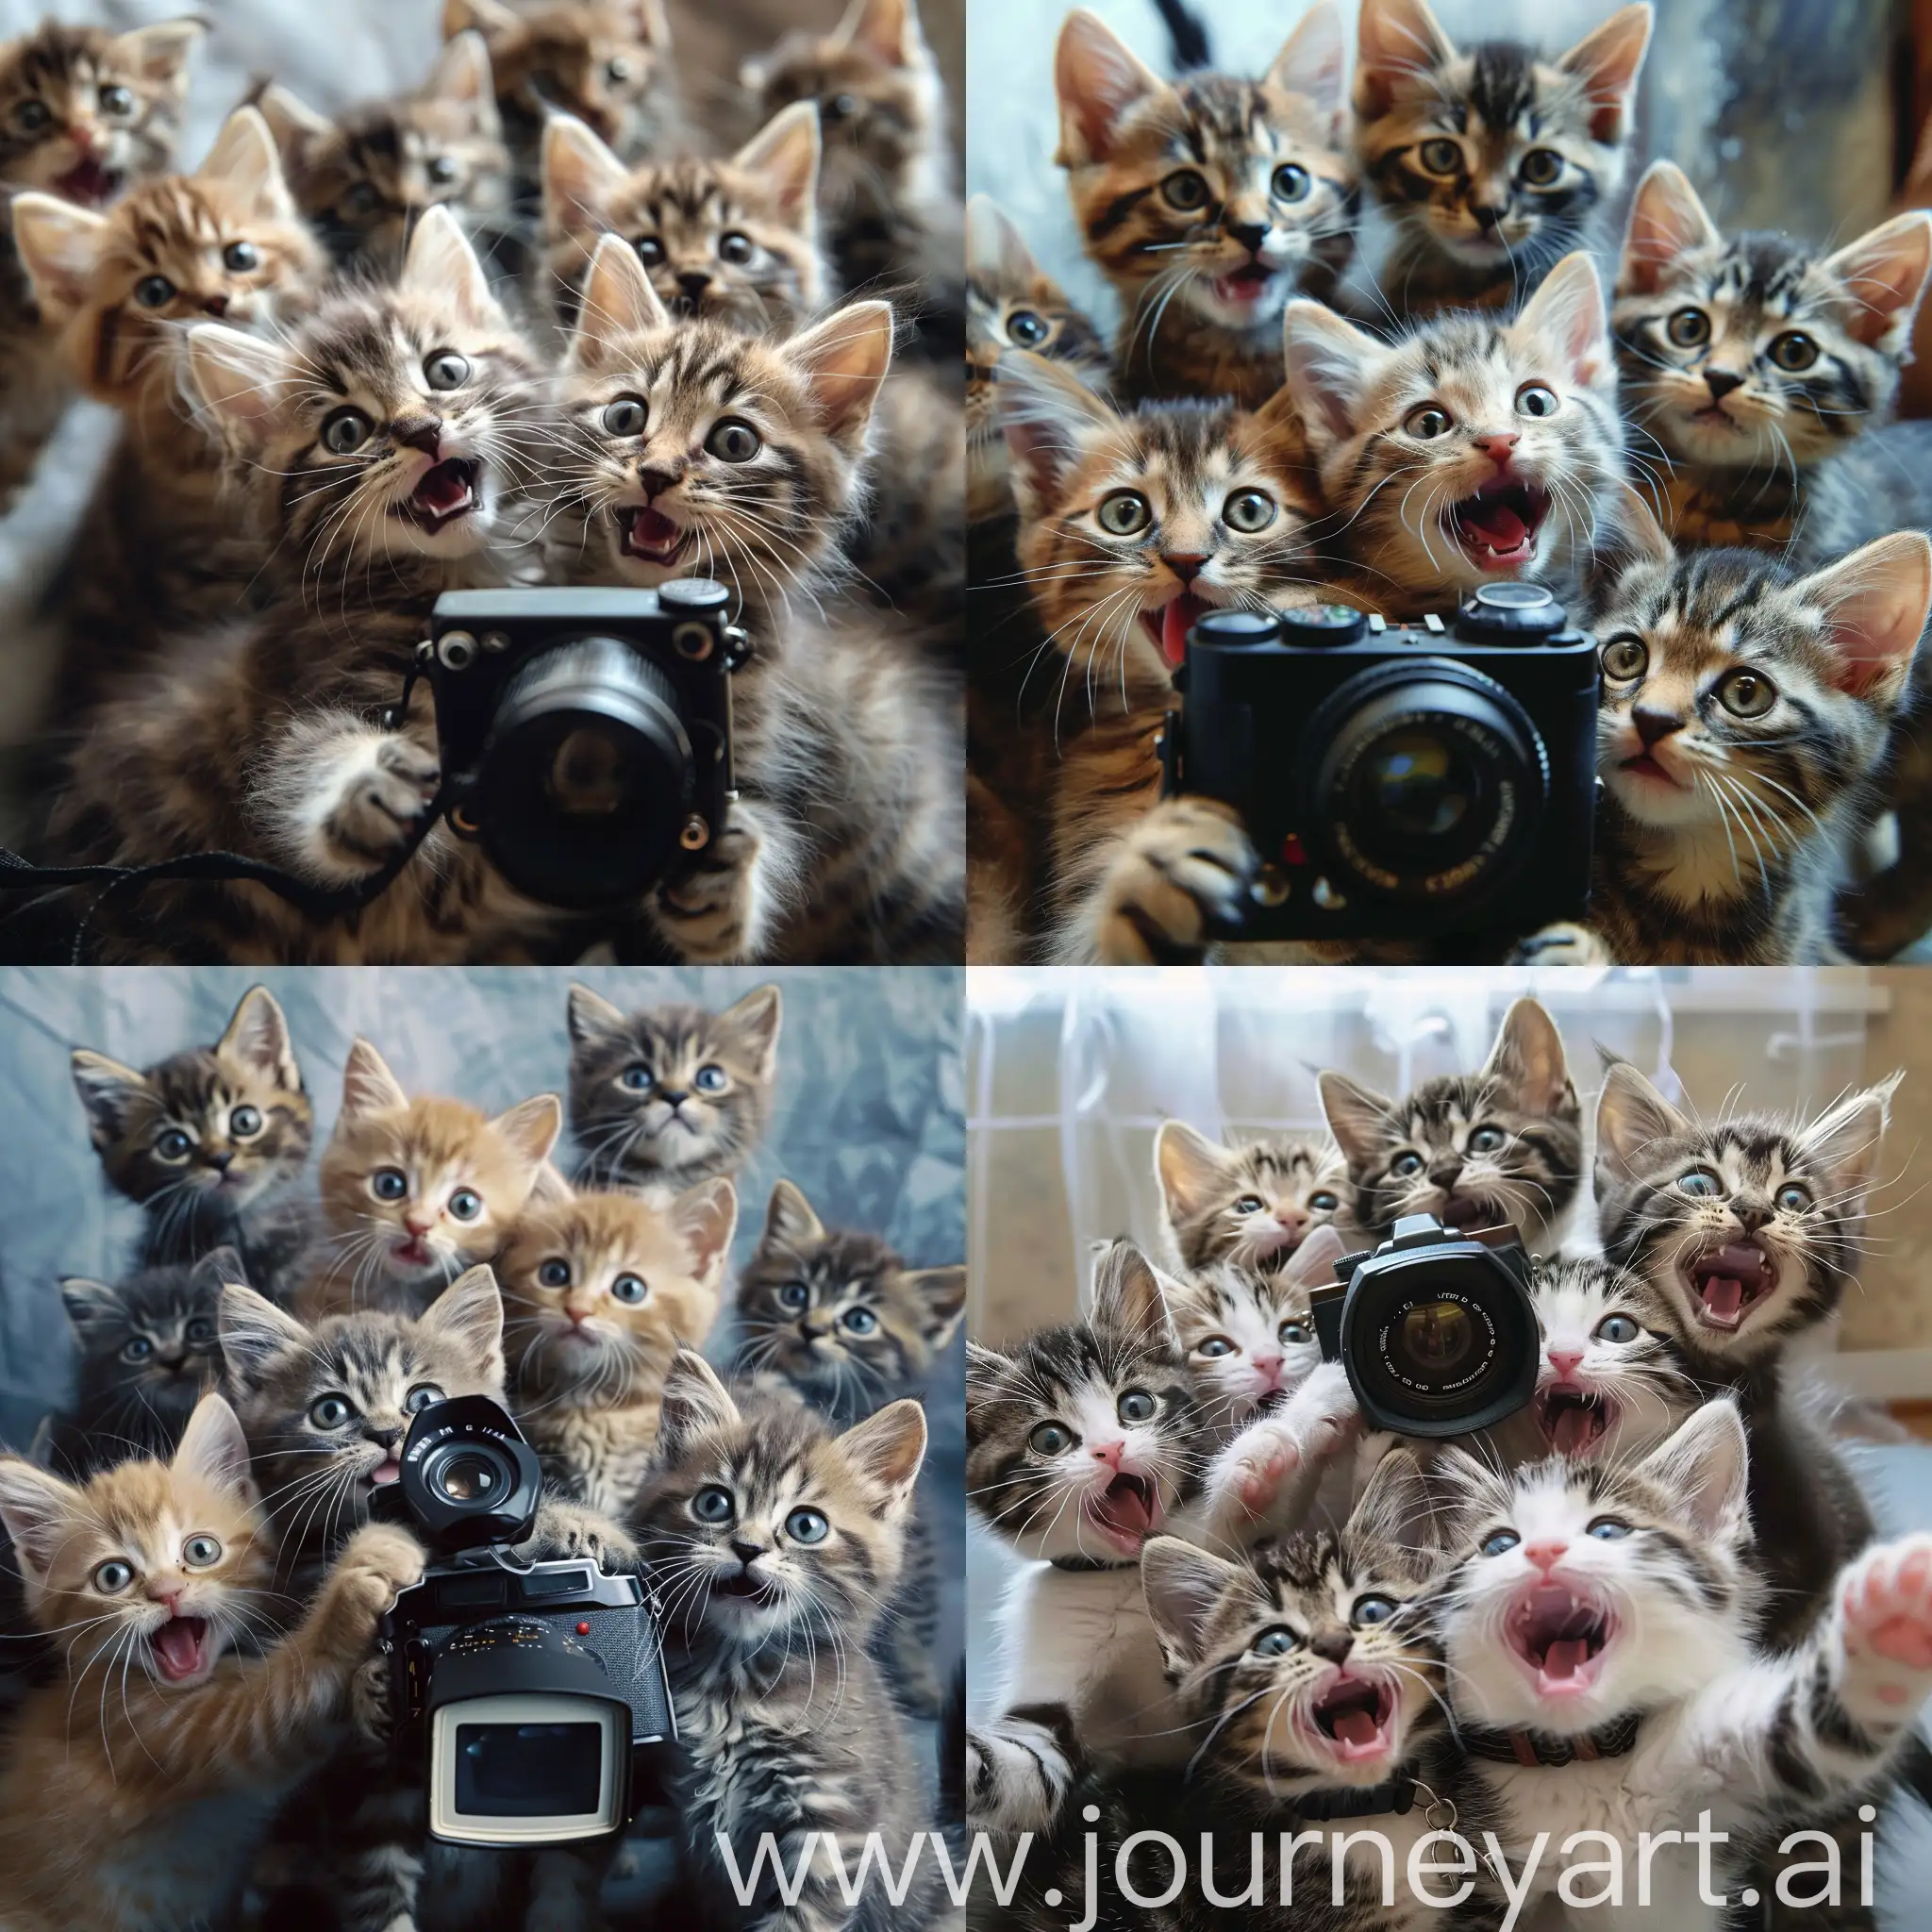 Adorable-Kittens-Capturing-Selfies-in-HighQuality-Photo-Studio-Moment